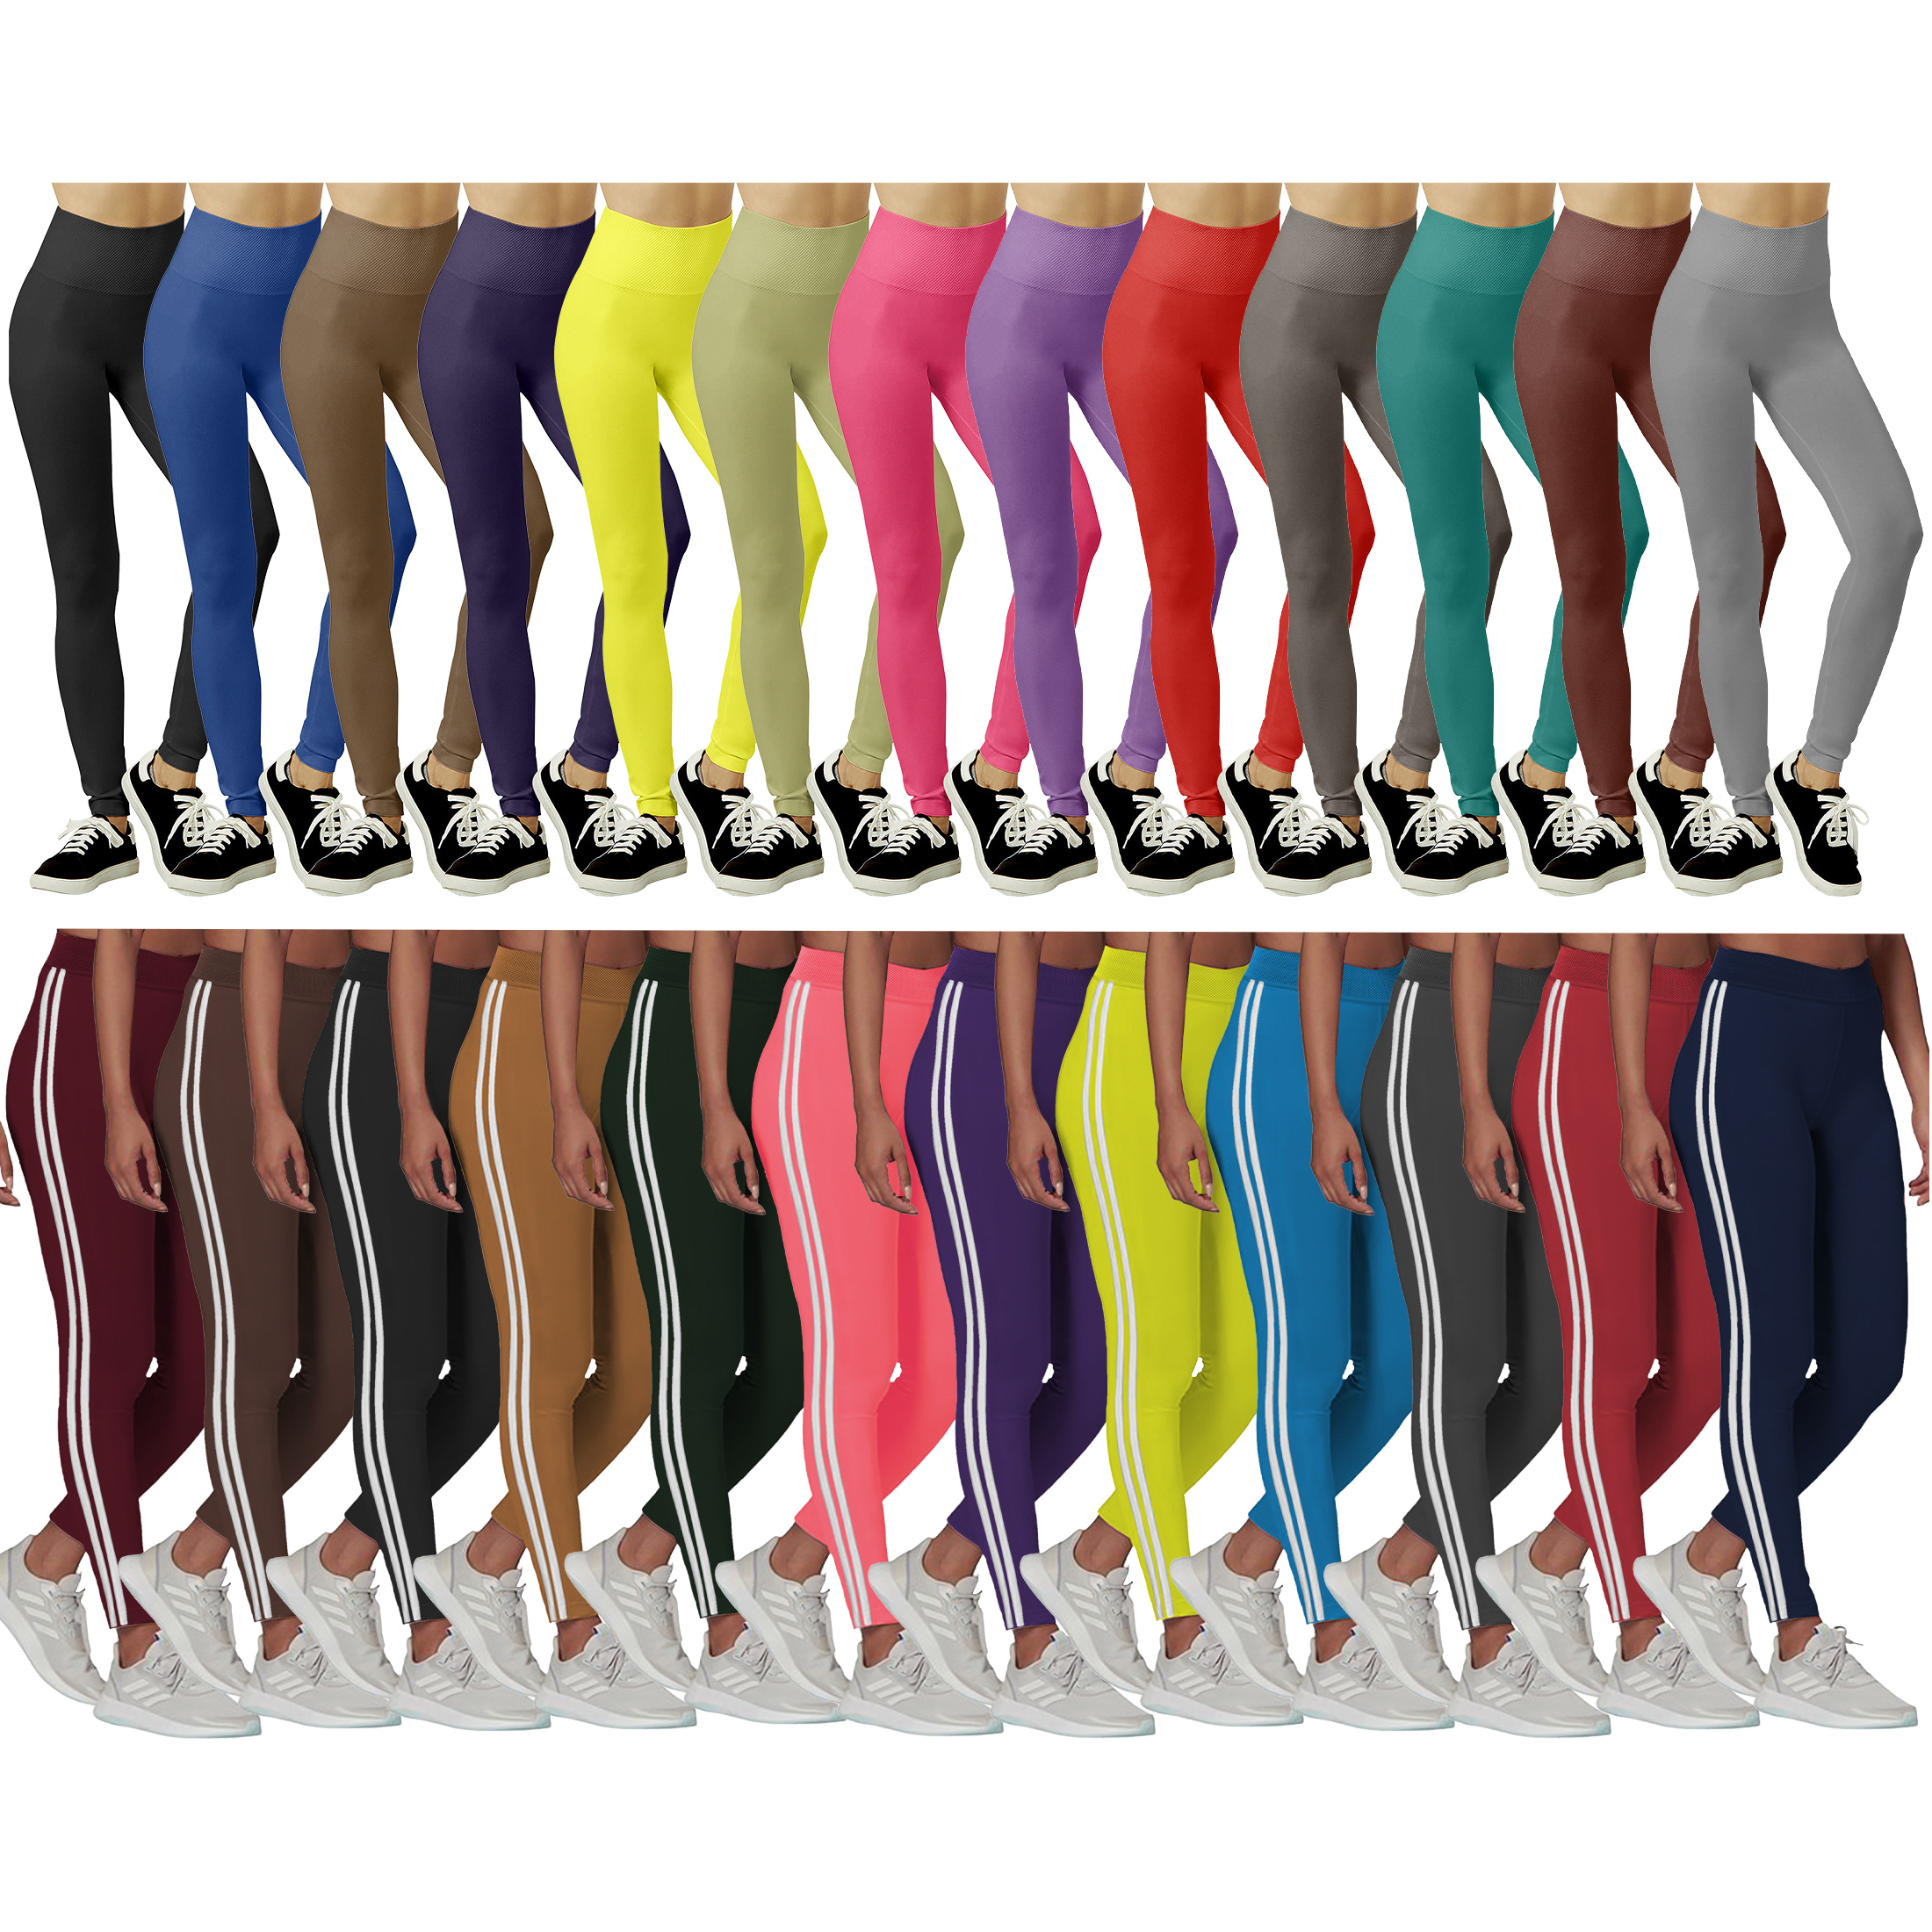 5-Pack Women's Fleece-Lined High Waisted Workout Yoga Leggings - Solid, L/XL